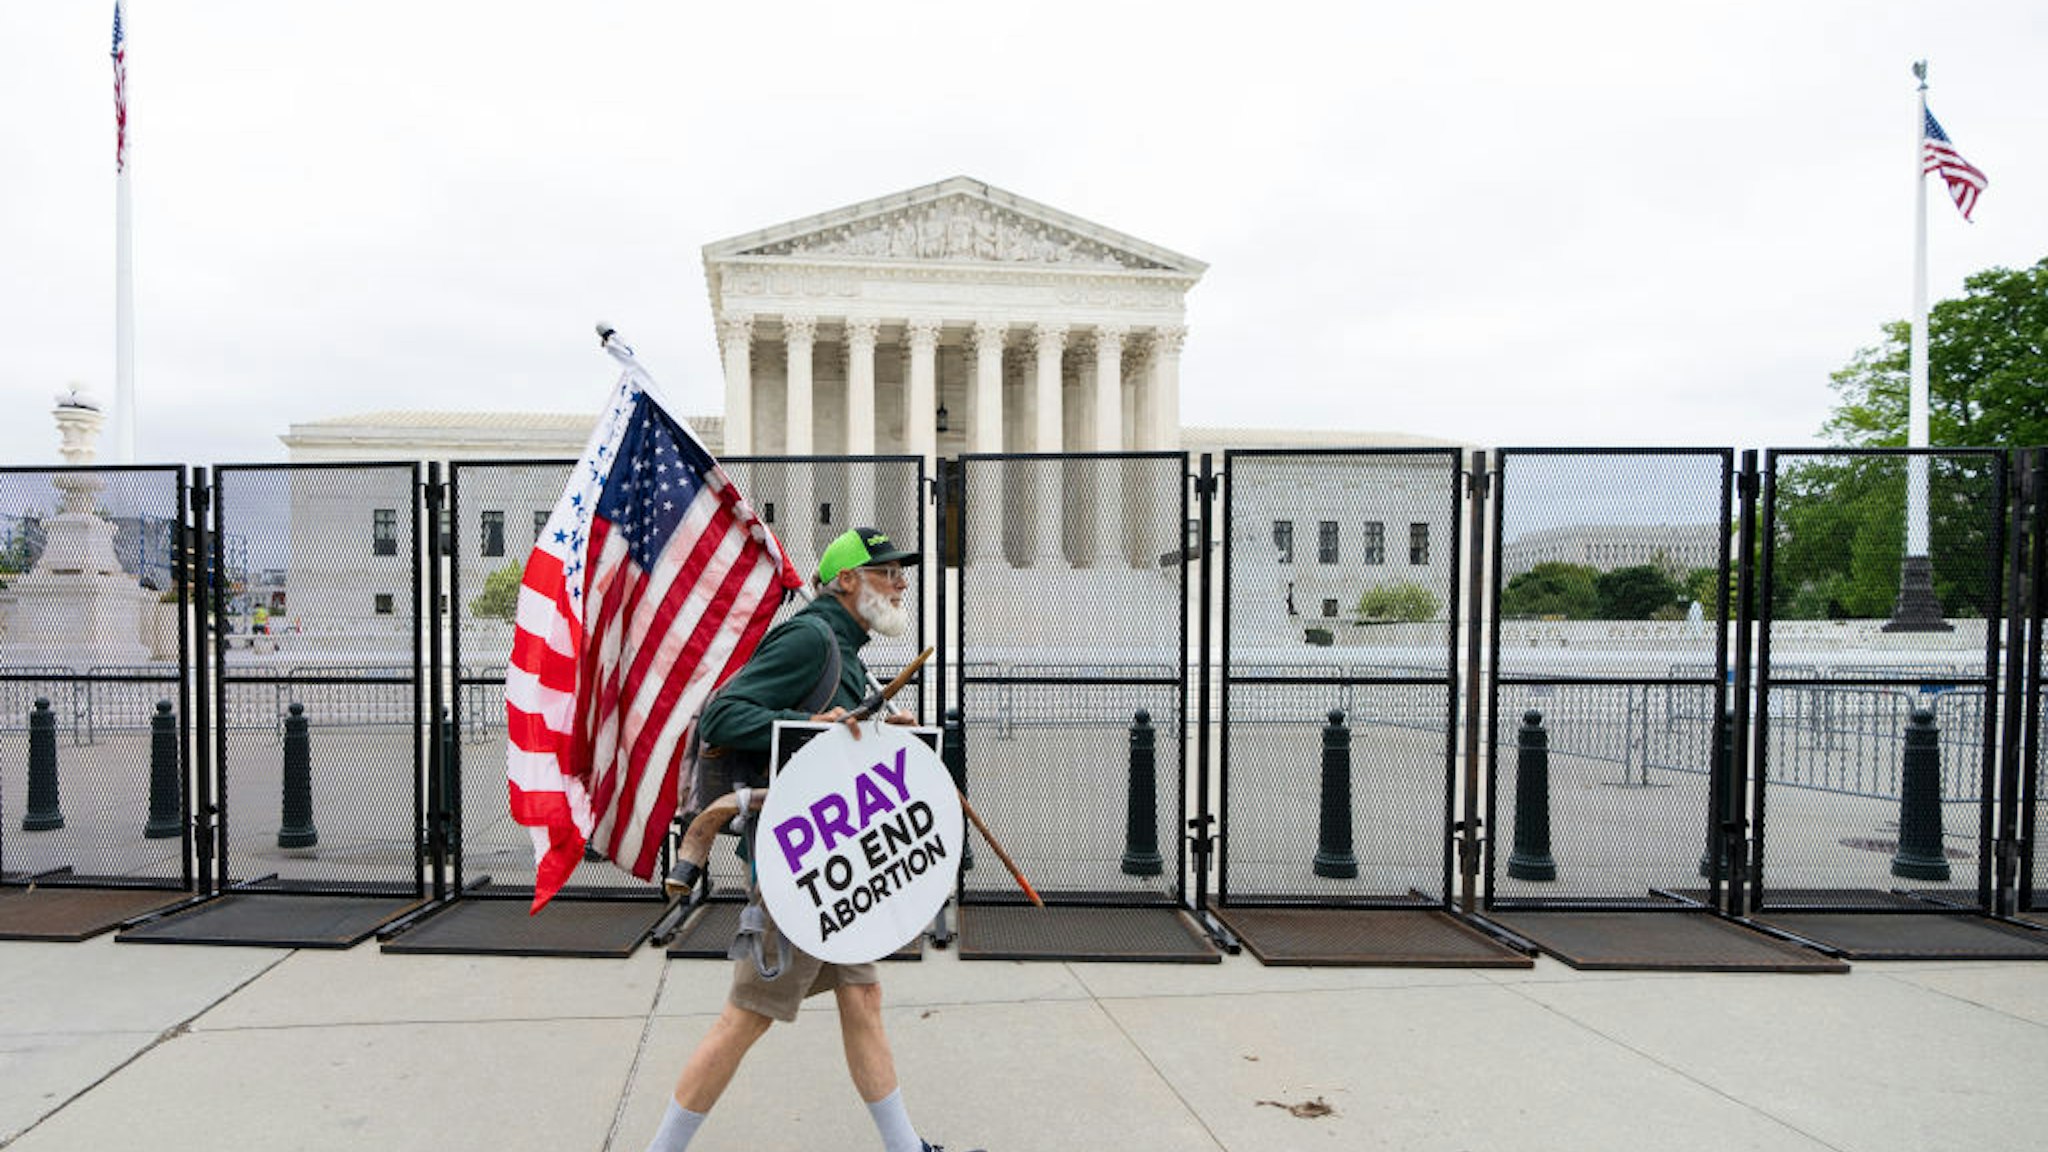 UNITED STATES - MAY 5: A pro-life protester walks by riot fencing surrounding the U.S. Supreme Court in Washington on Thursday, May 5, 2022. The fence was erected overnight in anticipation of ongoing protests following the leaked draft opinion indicating the court will overturn Roe v. Wade. (Bill Clark/CQ-Roll Call, Inc via Getty Images)